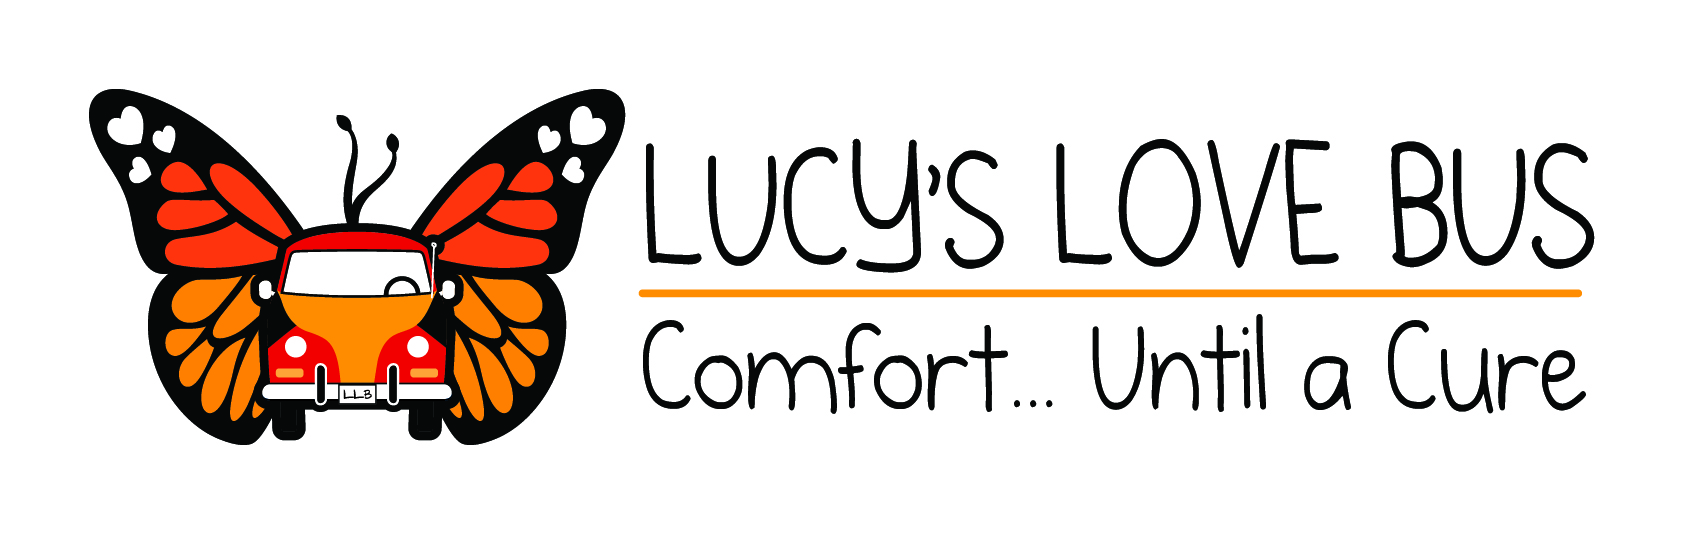 Lucy’s Love Bus